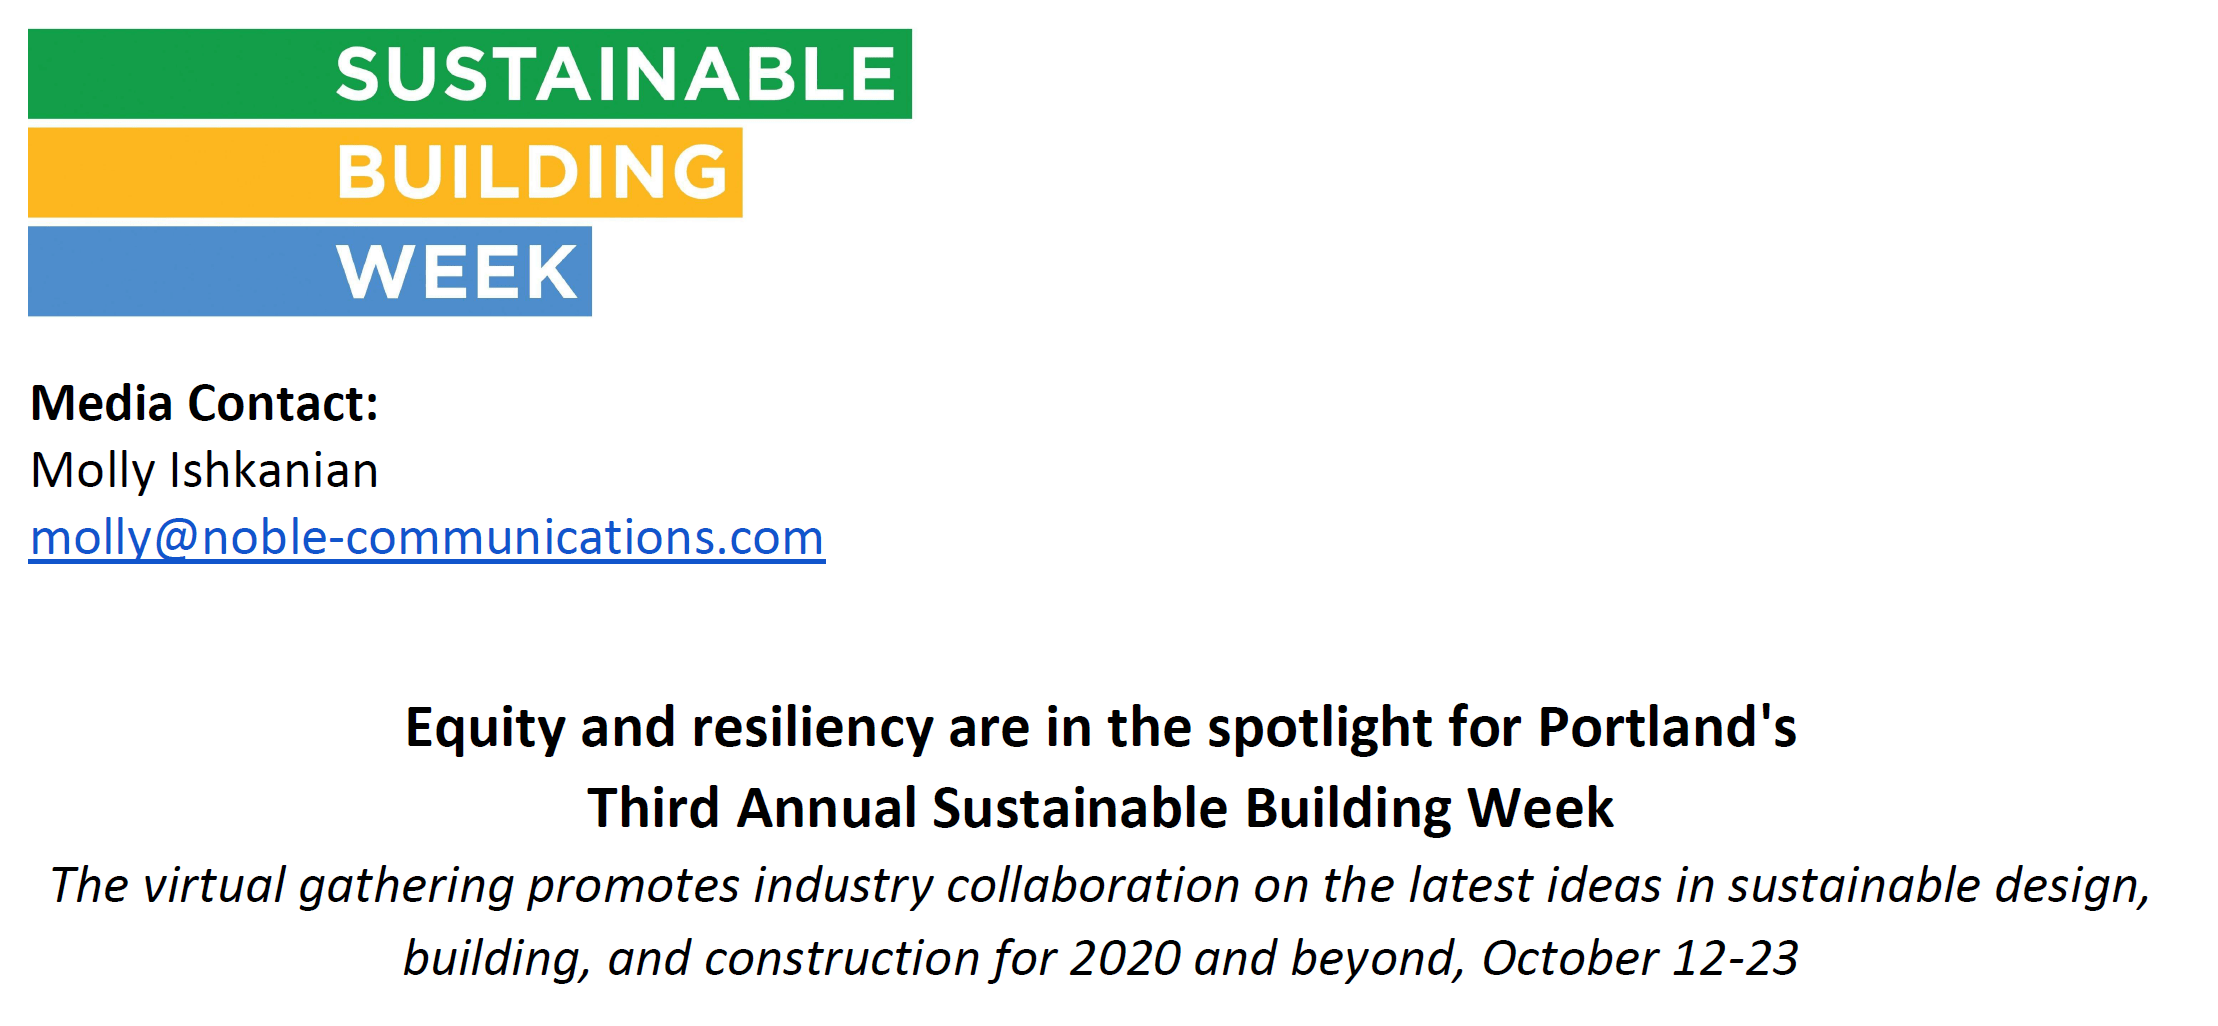 Equity and resiliency are in the spotlight for Portland’s Third Annual Sustainable Building Week